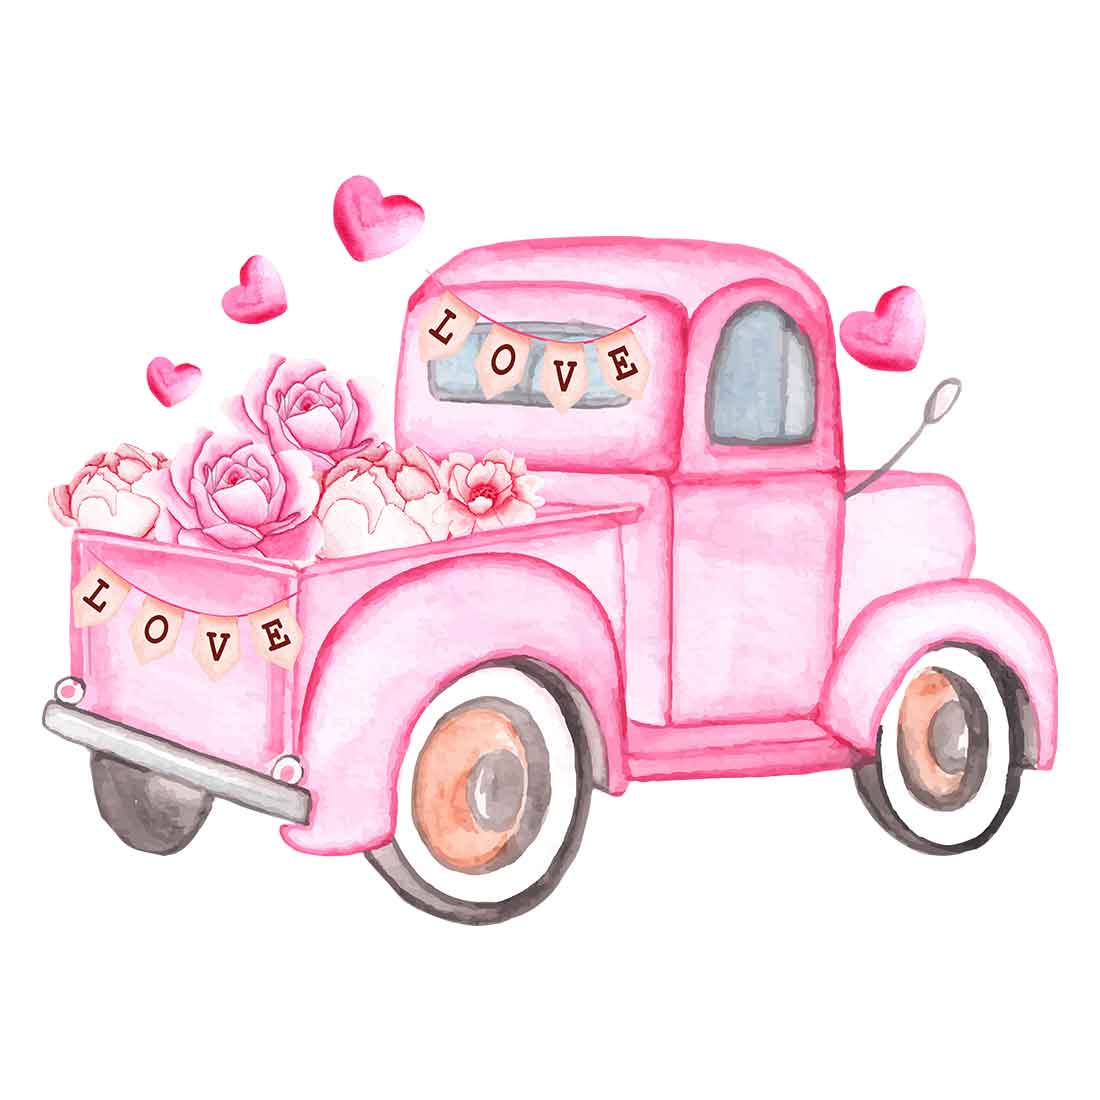 Charming image of a pink truck